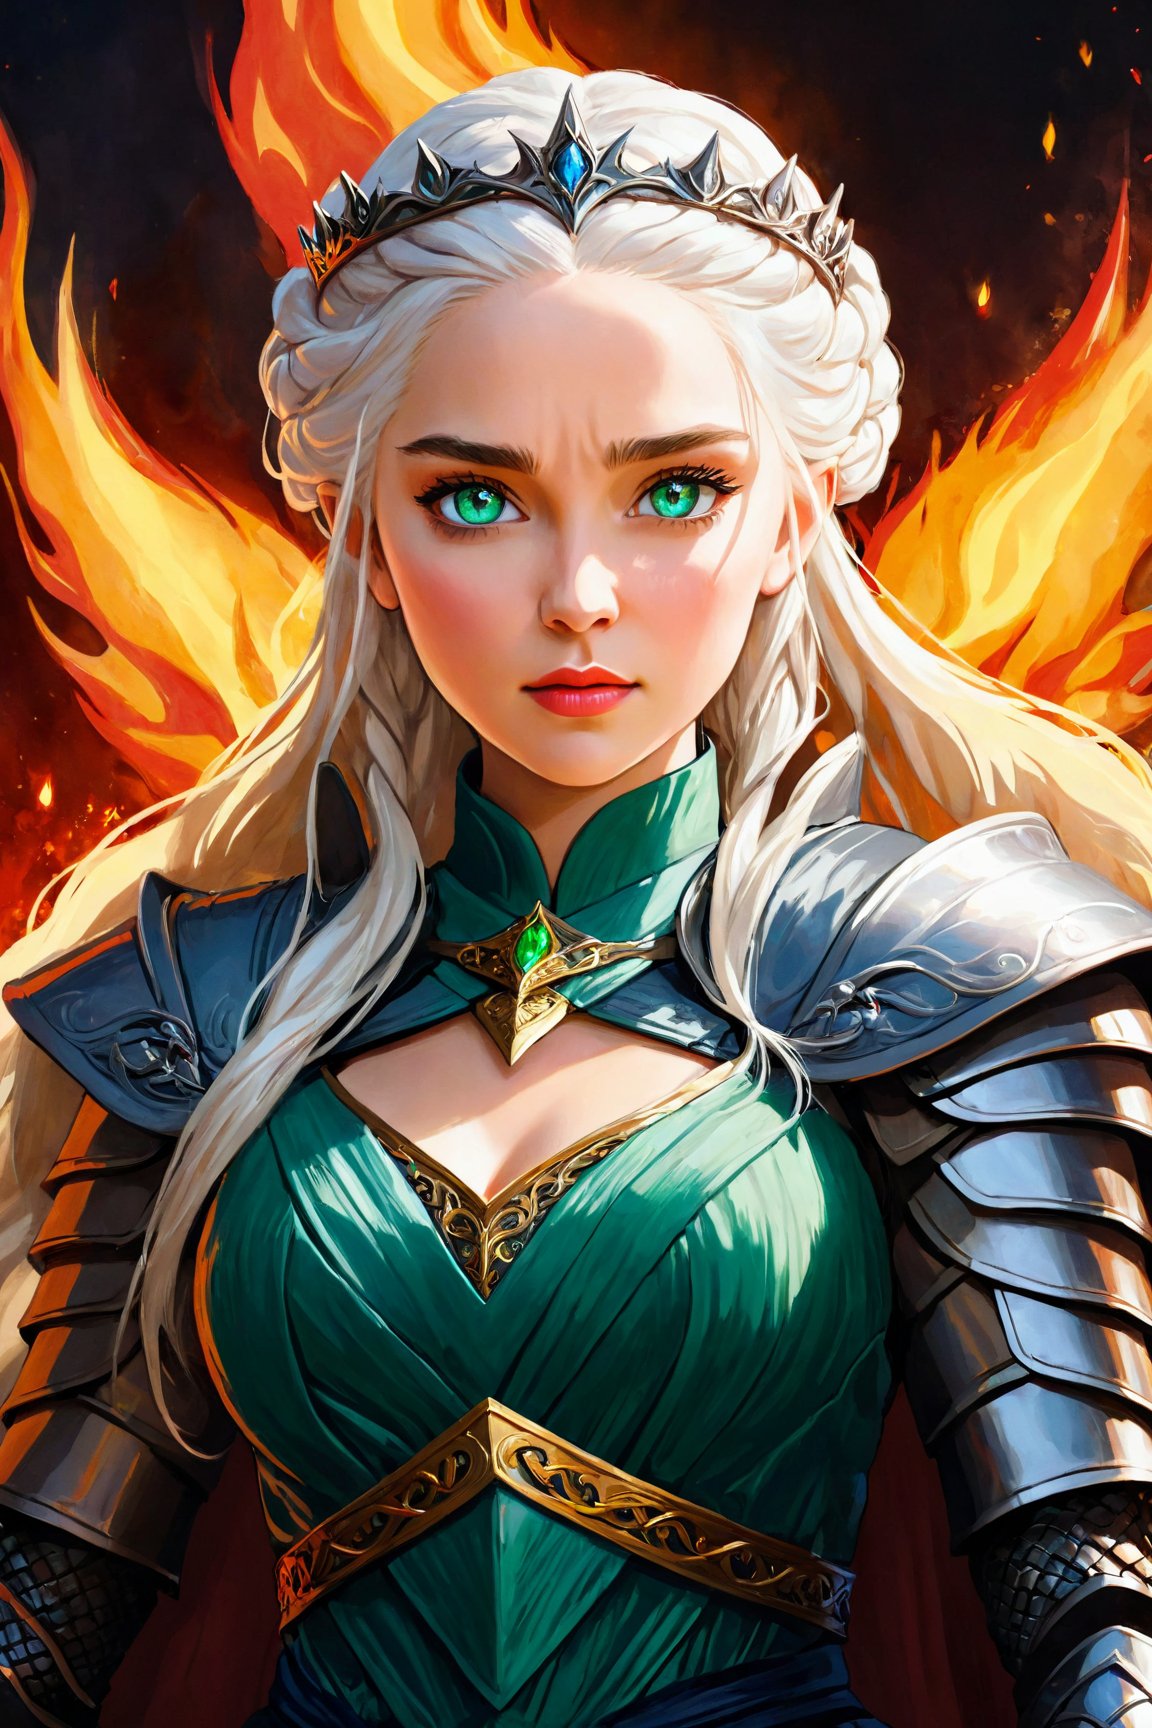 (daenerys targaryen),anime style,portrait,colorful fantasy scenery,dragon,iron throne,stormborn,braided silver hair,regal crown,emerald eyes,powerful queen,fire and blood,scale armor,dark background,expressive eyes,proud and confident expression,flames dancing around her,realistic lighting,epic battle scene,vivid colors,emotionally charged,beautifully detailed costume,mesmerizing gaze. (best quality,ultra-detailed,realistic:1.37),intricate details,gorgeous hand-painted textures,imaginative world,fierce determination.